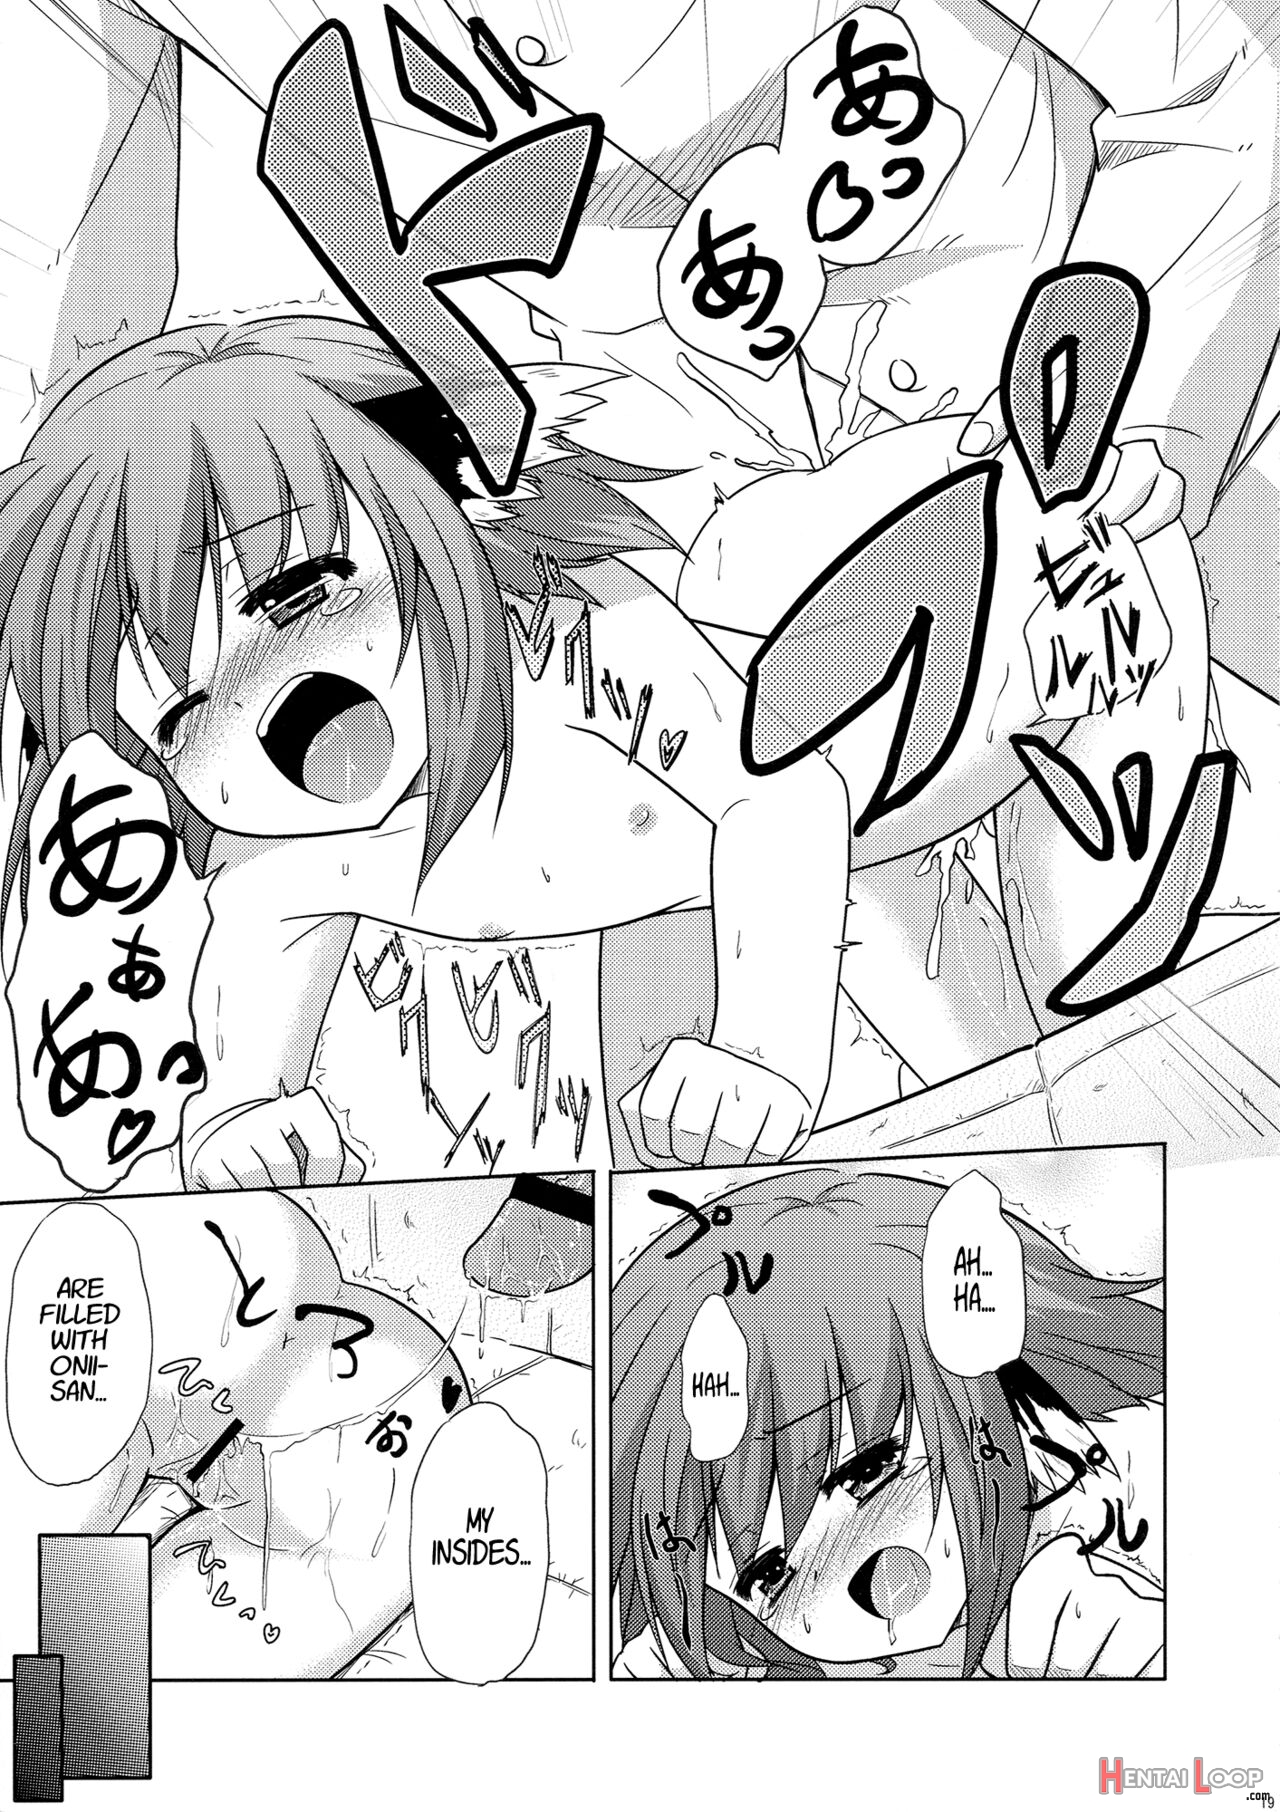 Kyouko's Daily Life page 18